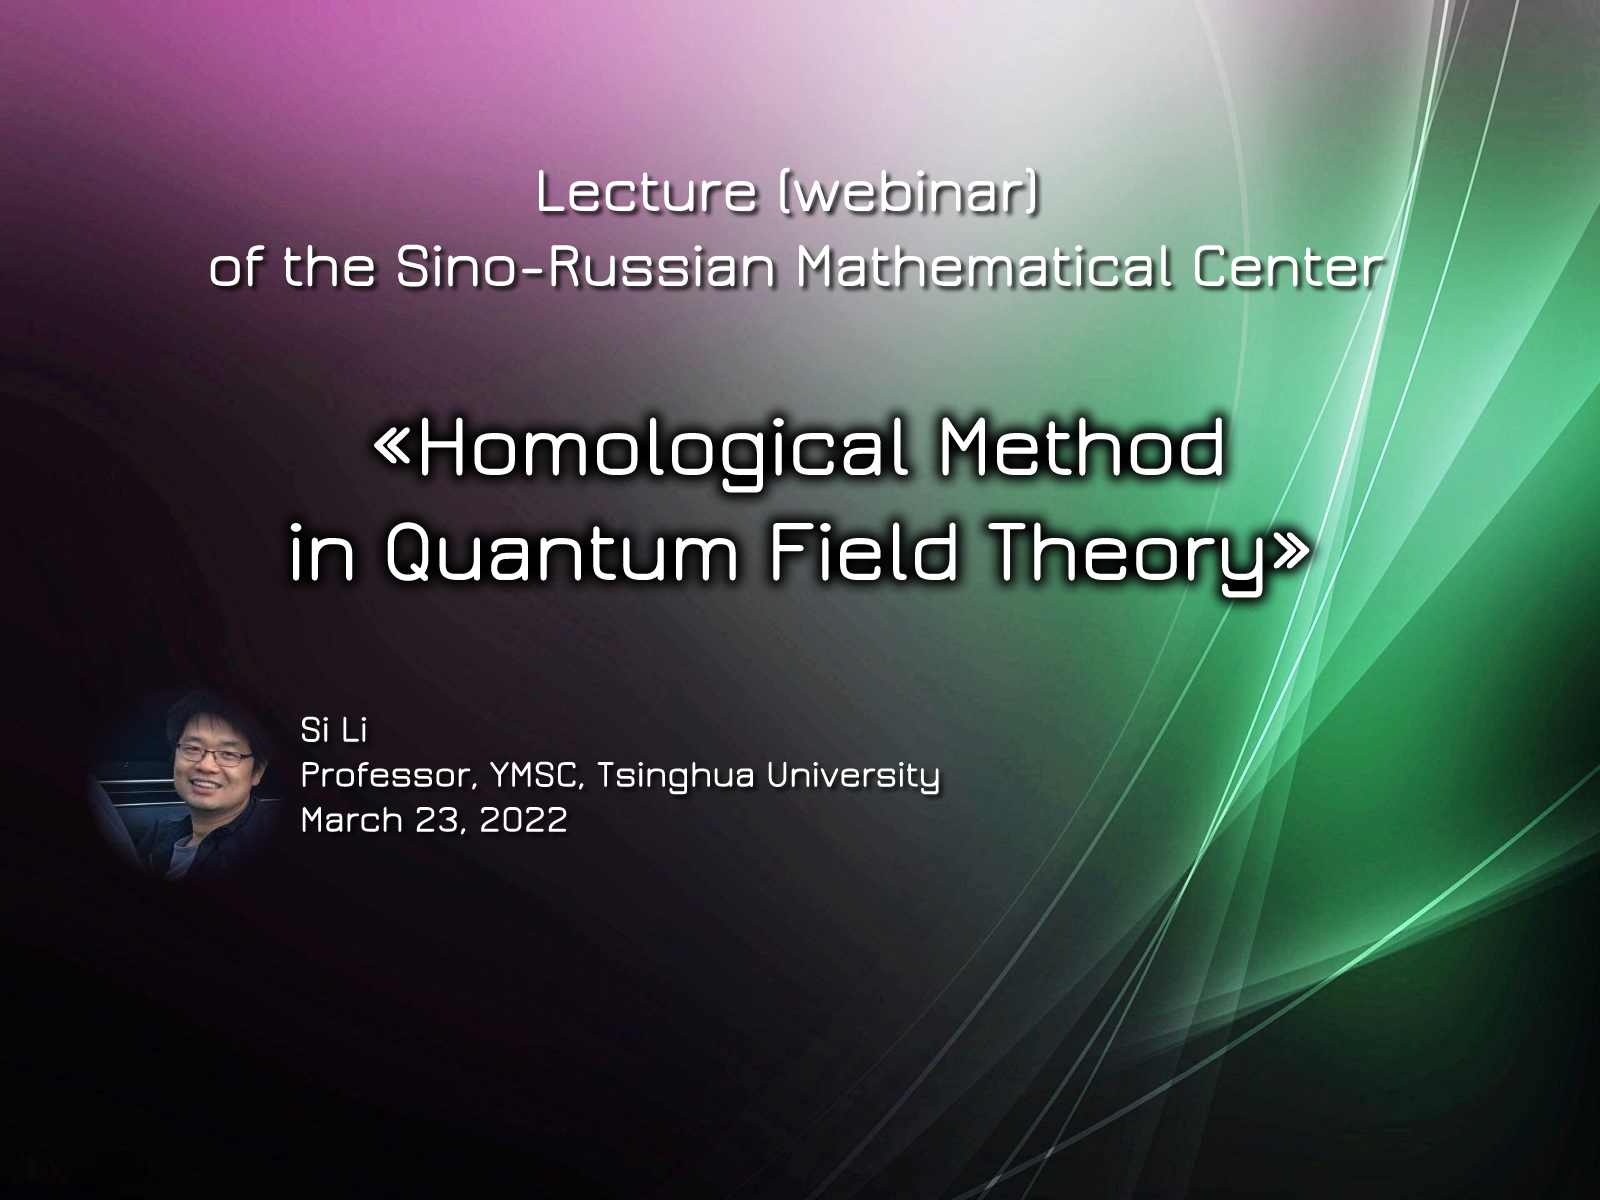 «Homological Method in Quantum Field Theory» 23.03.2022